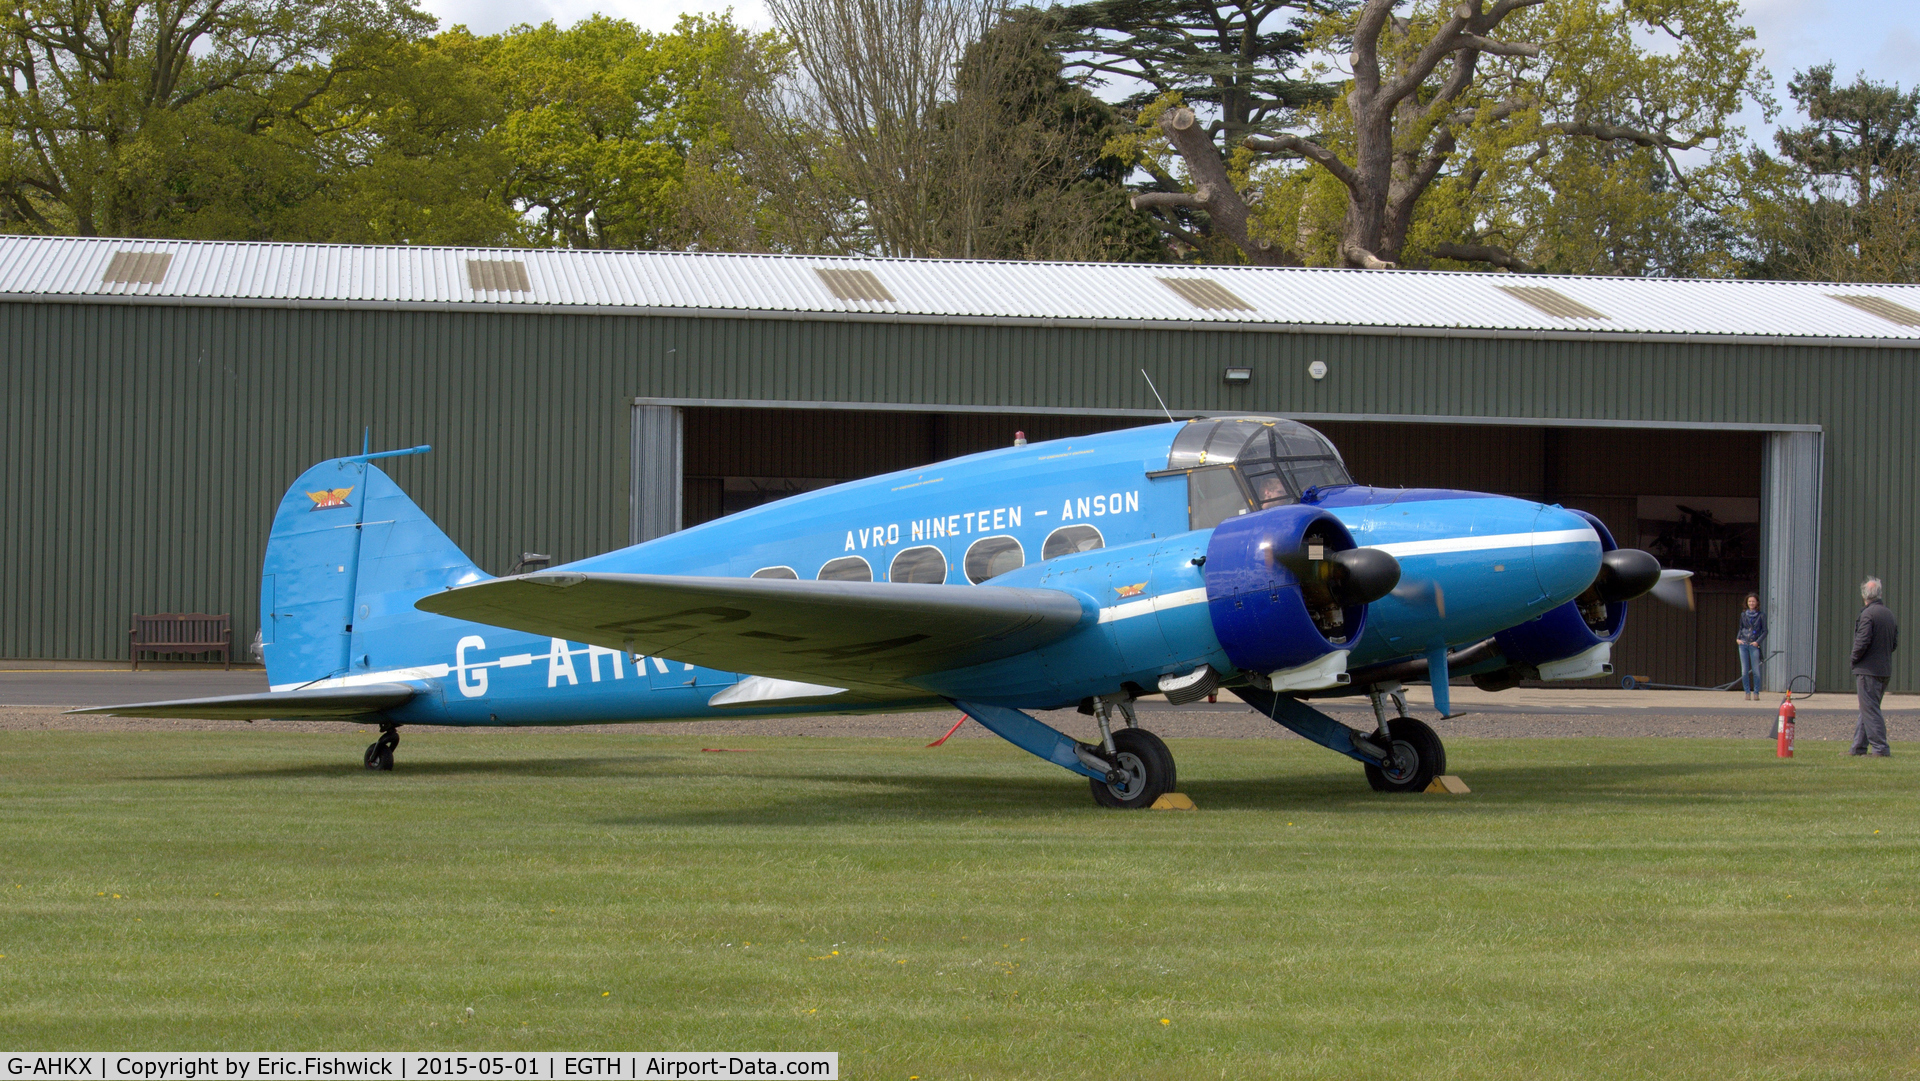 G-AHKX, 1946 Avro 652A Anson C.19 Series 2 C/N 1333, 3. G-AHKX engine run-up prior to first 2015 Season's Display at The Shuttleworth Collection.